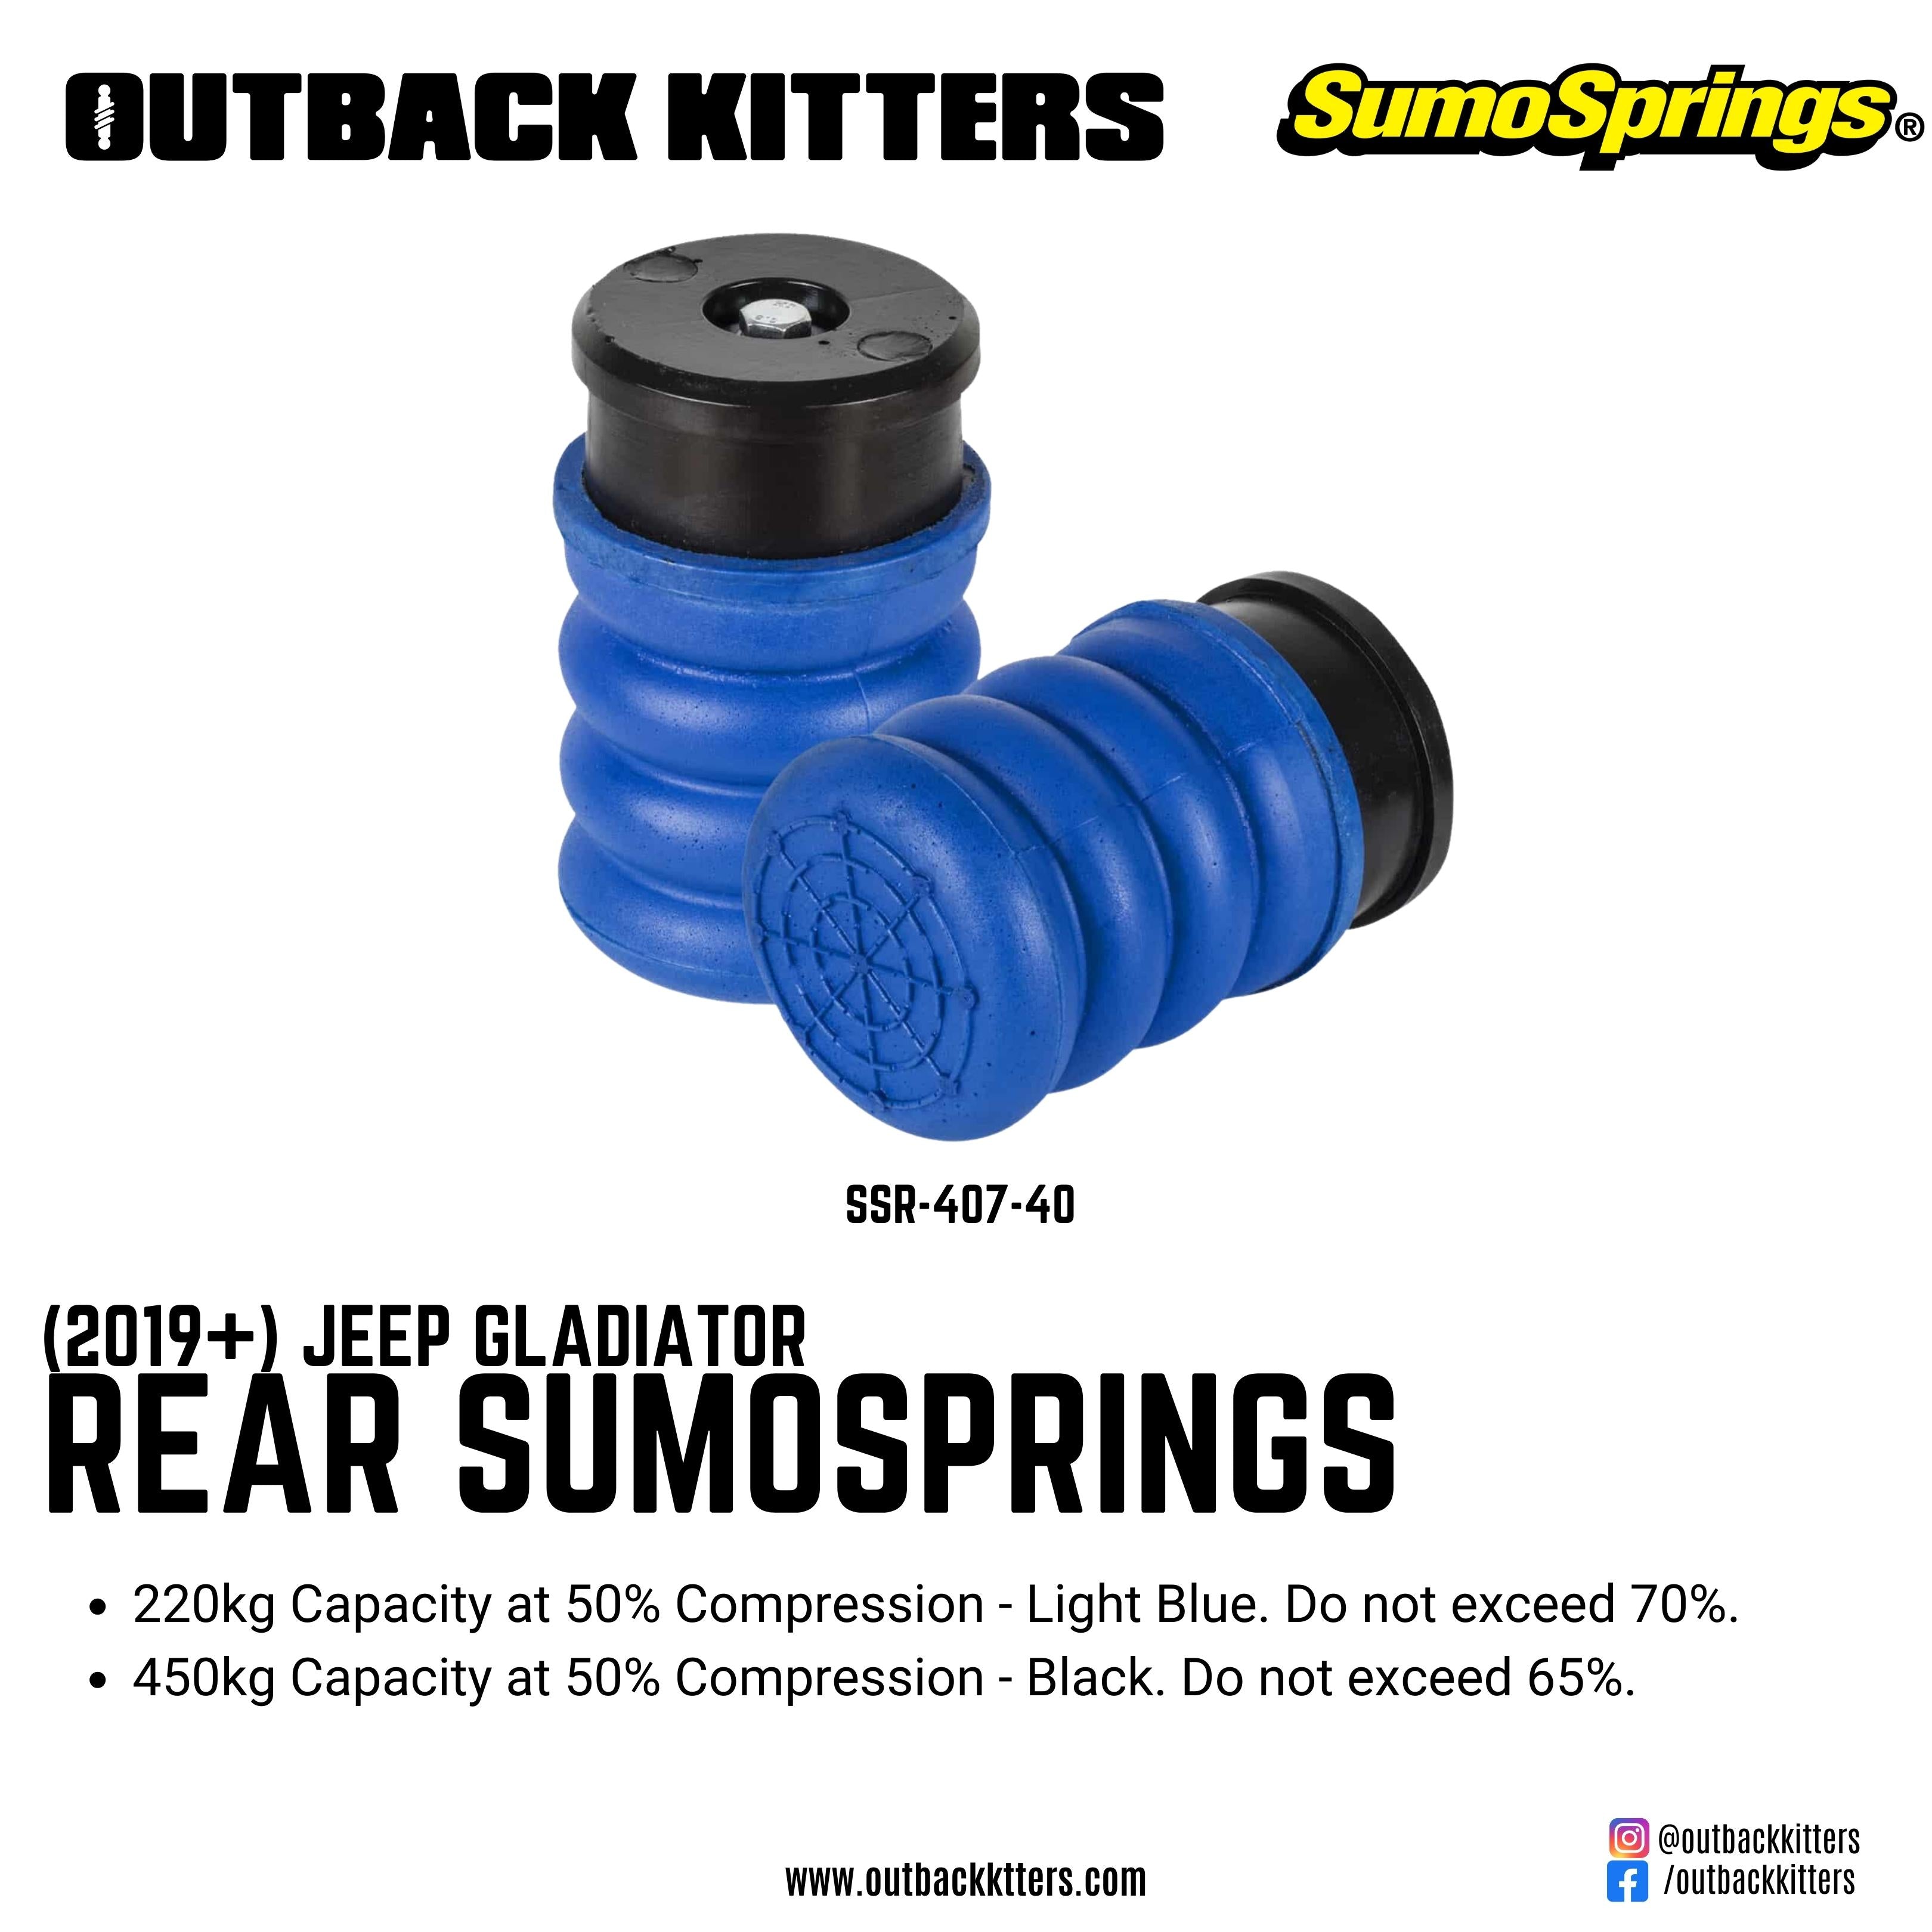 Rear SumoSprings to suit 2019+ Jeep Gladiator - Outback Kitters